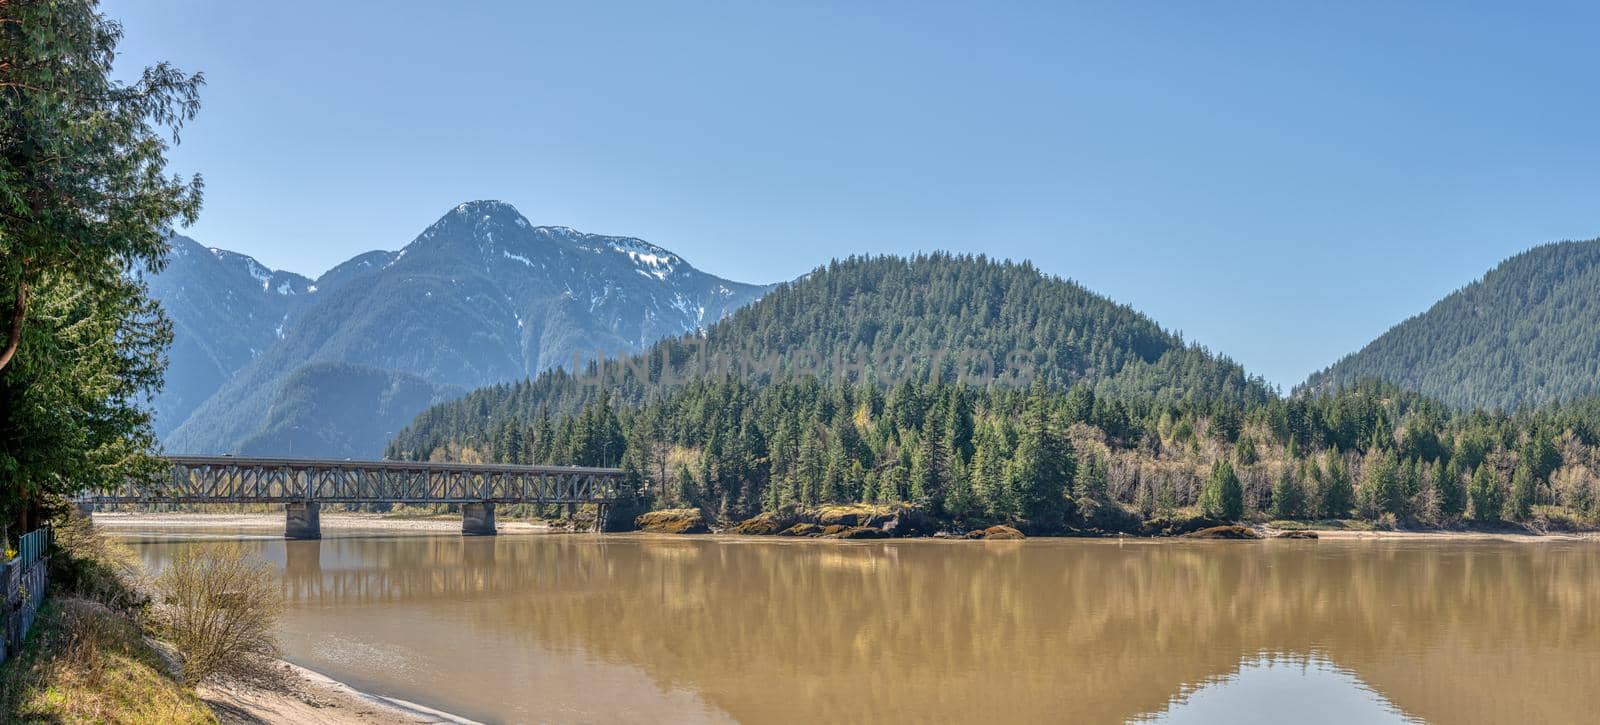 Fraser river panoramic view with the bridge in British Columbia by Imagenet